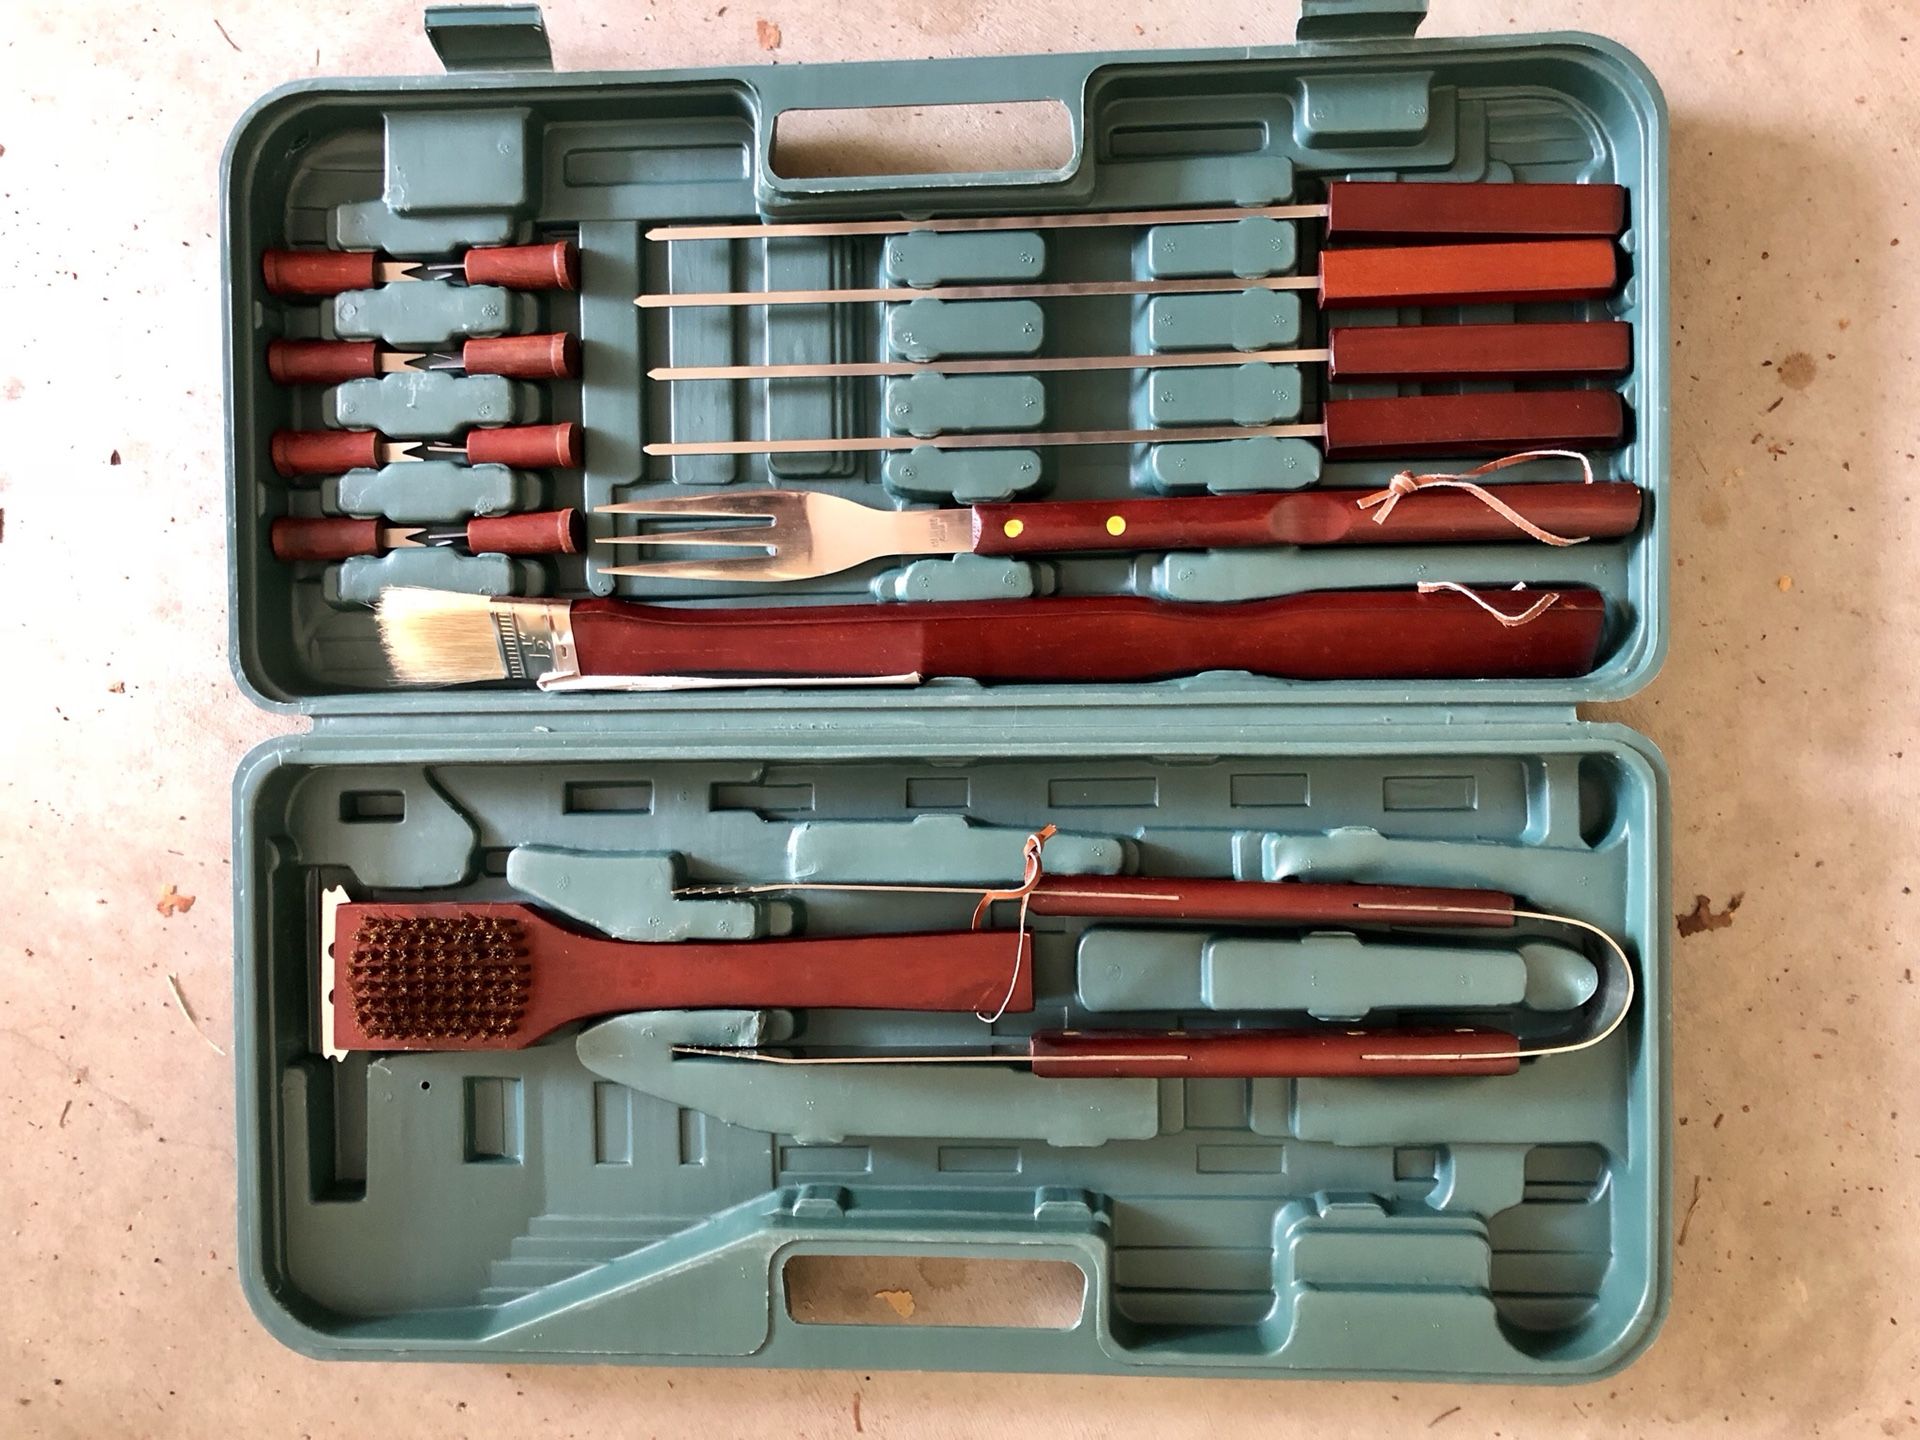 Brand new BBQ Grill Stainless Steel Tool Set